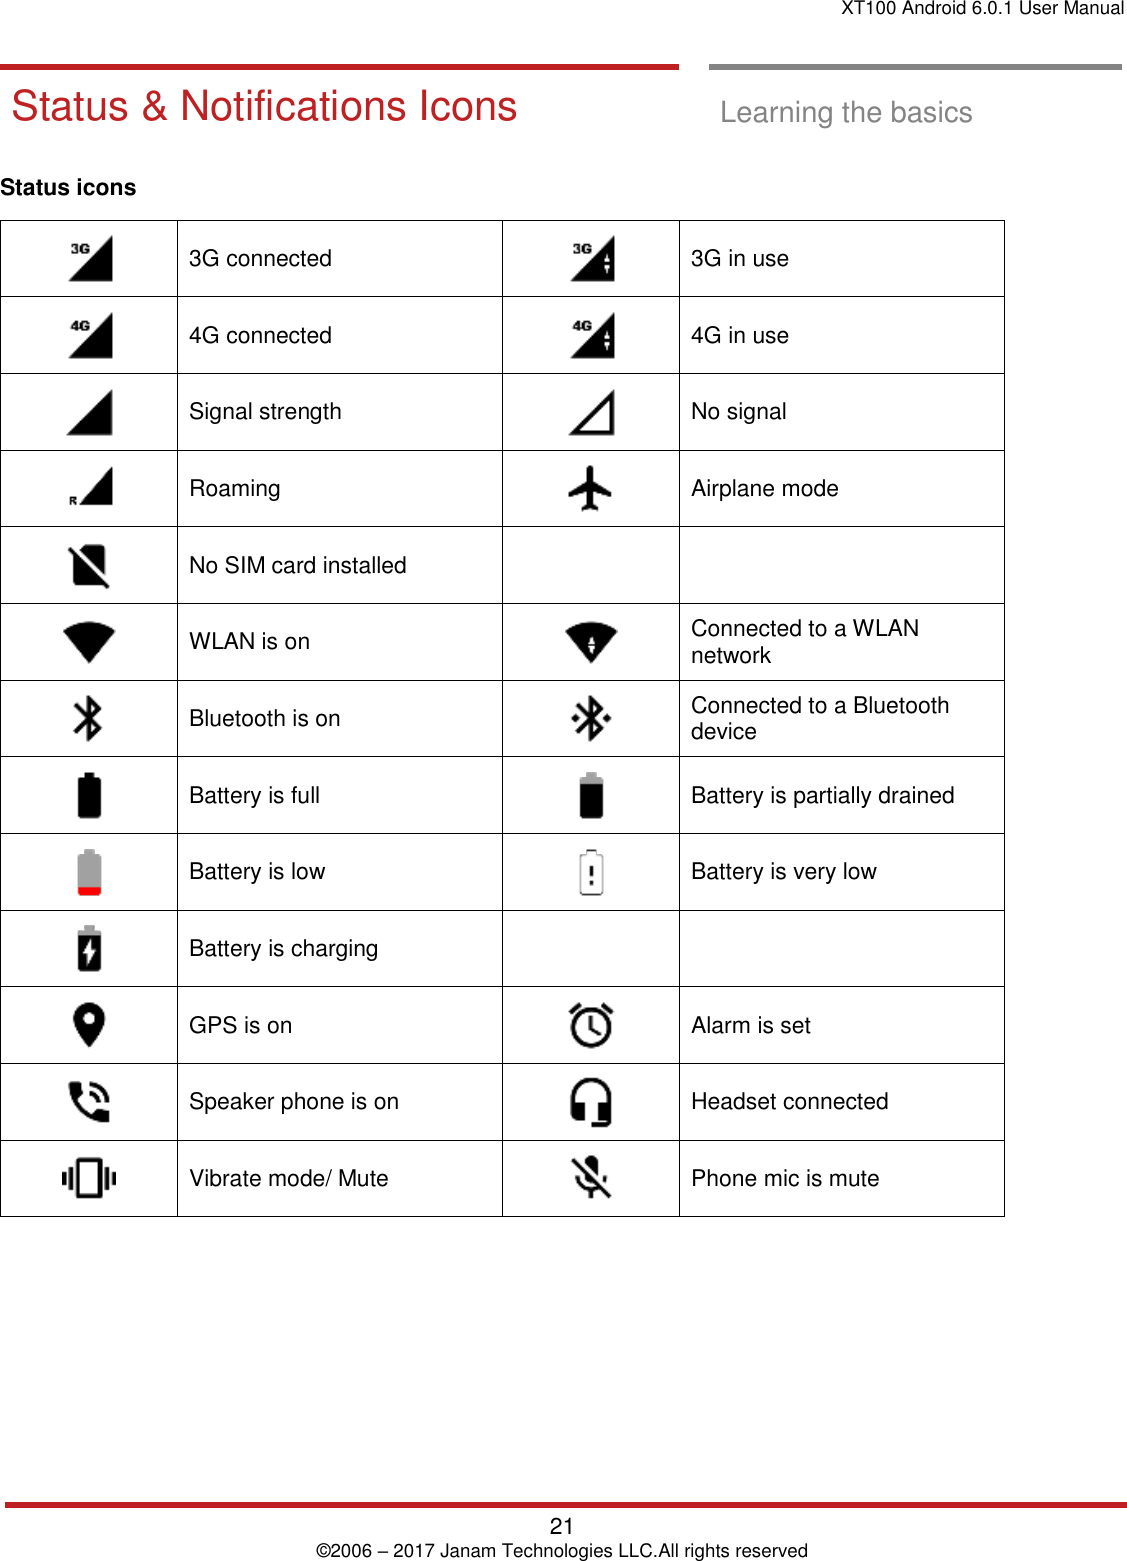 XT100 Android 6.0.1 User Manual   21 © 2006 – 2017 Janam Technologies LLC.All rights reserved  Learning the basics  Status &amp; Notific ations Icons Status &amp; Notifications Icons  Learning the basics  Status icons         3G connected  3G in use  4G connected  4G in use  Signal strength  No signal  Roaming  Airplane mode  No SIM card installed    WLAN is on  Connected to a WLAN network  Bluetooth is on  Connected to a Bluetooth device  Battery is full  Battery is partially drained  Battery is low  Battery is very low  Battery is charging    GPS is on  Alarm is set  Speaker phone is on  Headset connected  Vibrate mode/ Mute  Phone mic is mute 